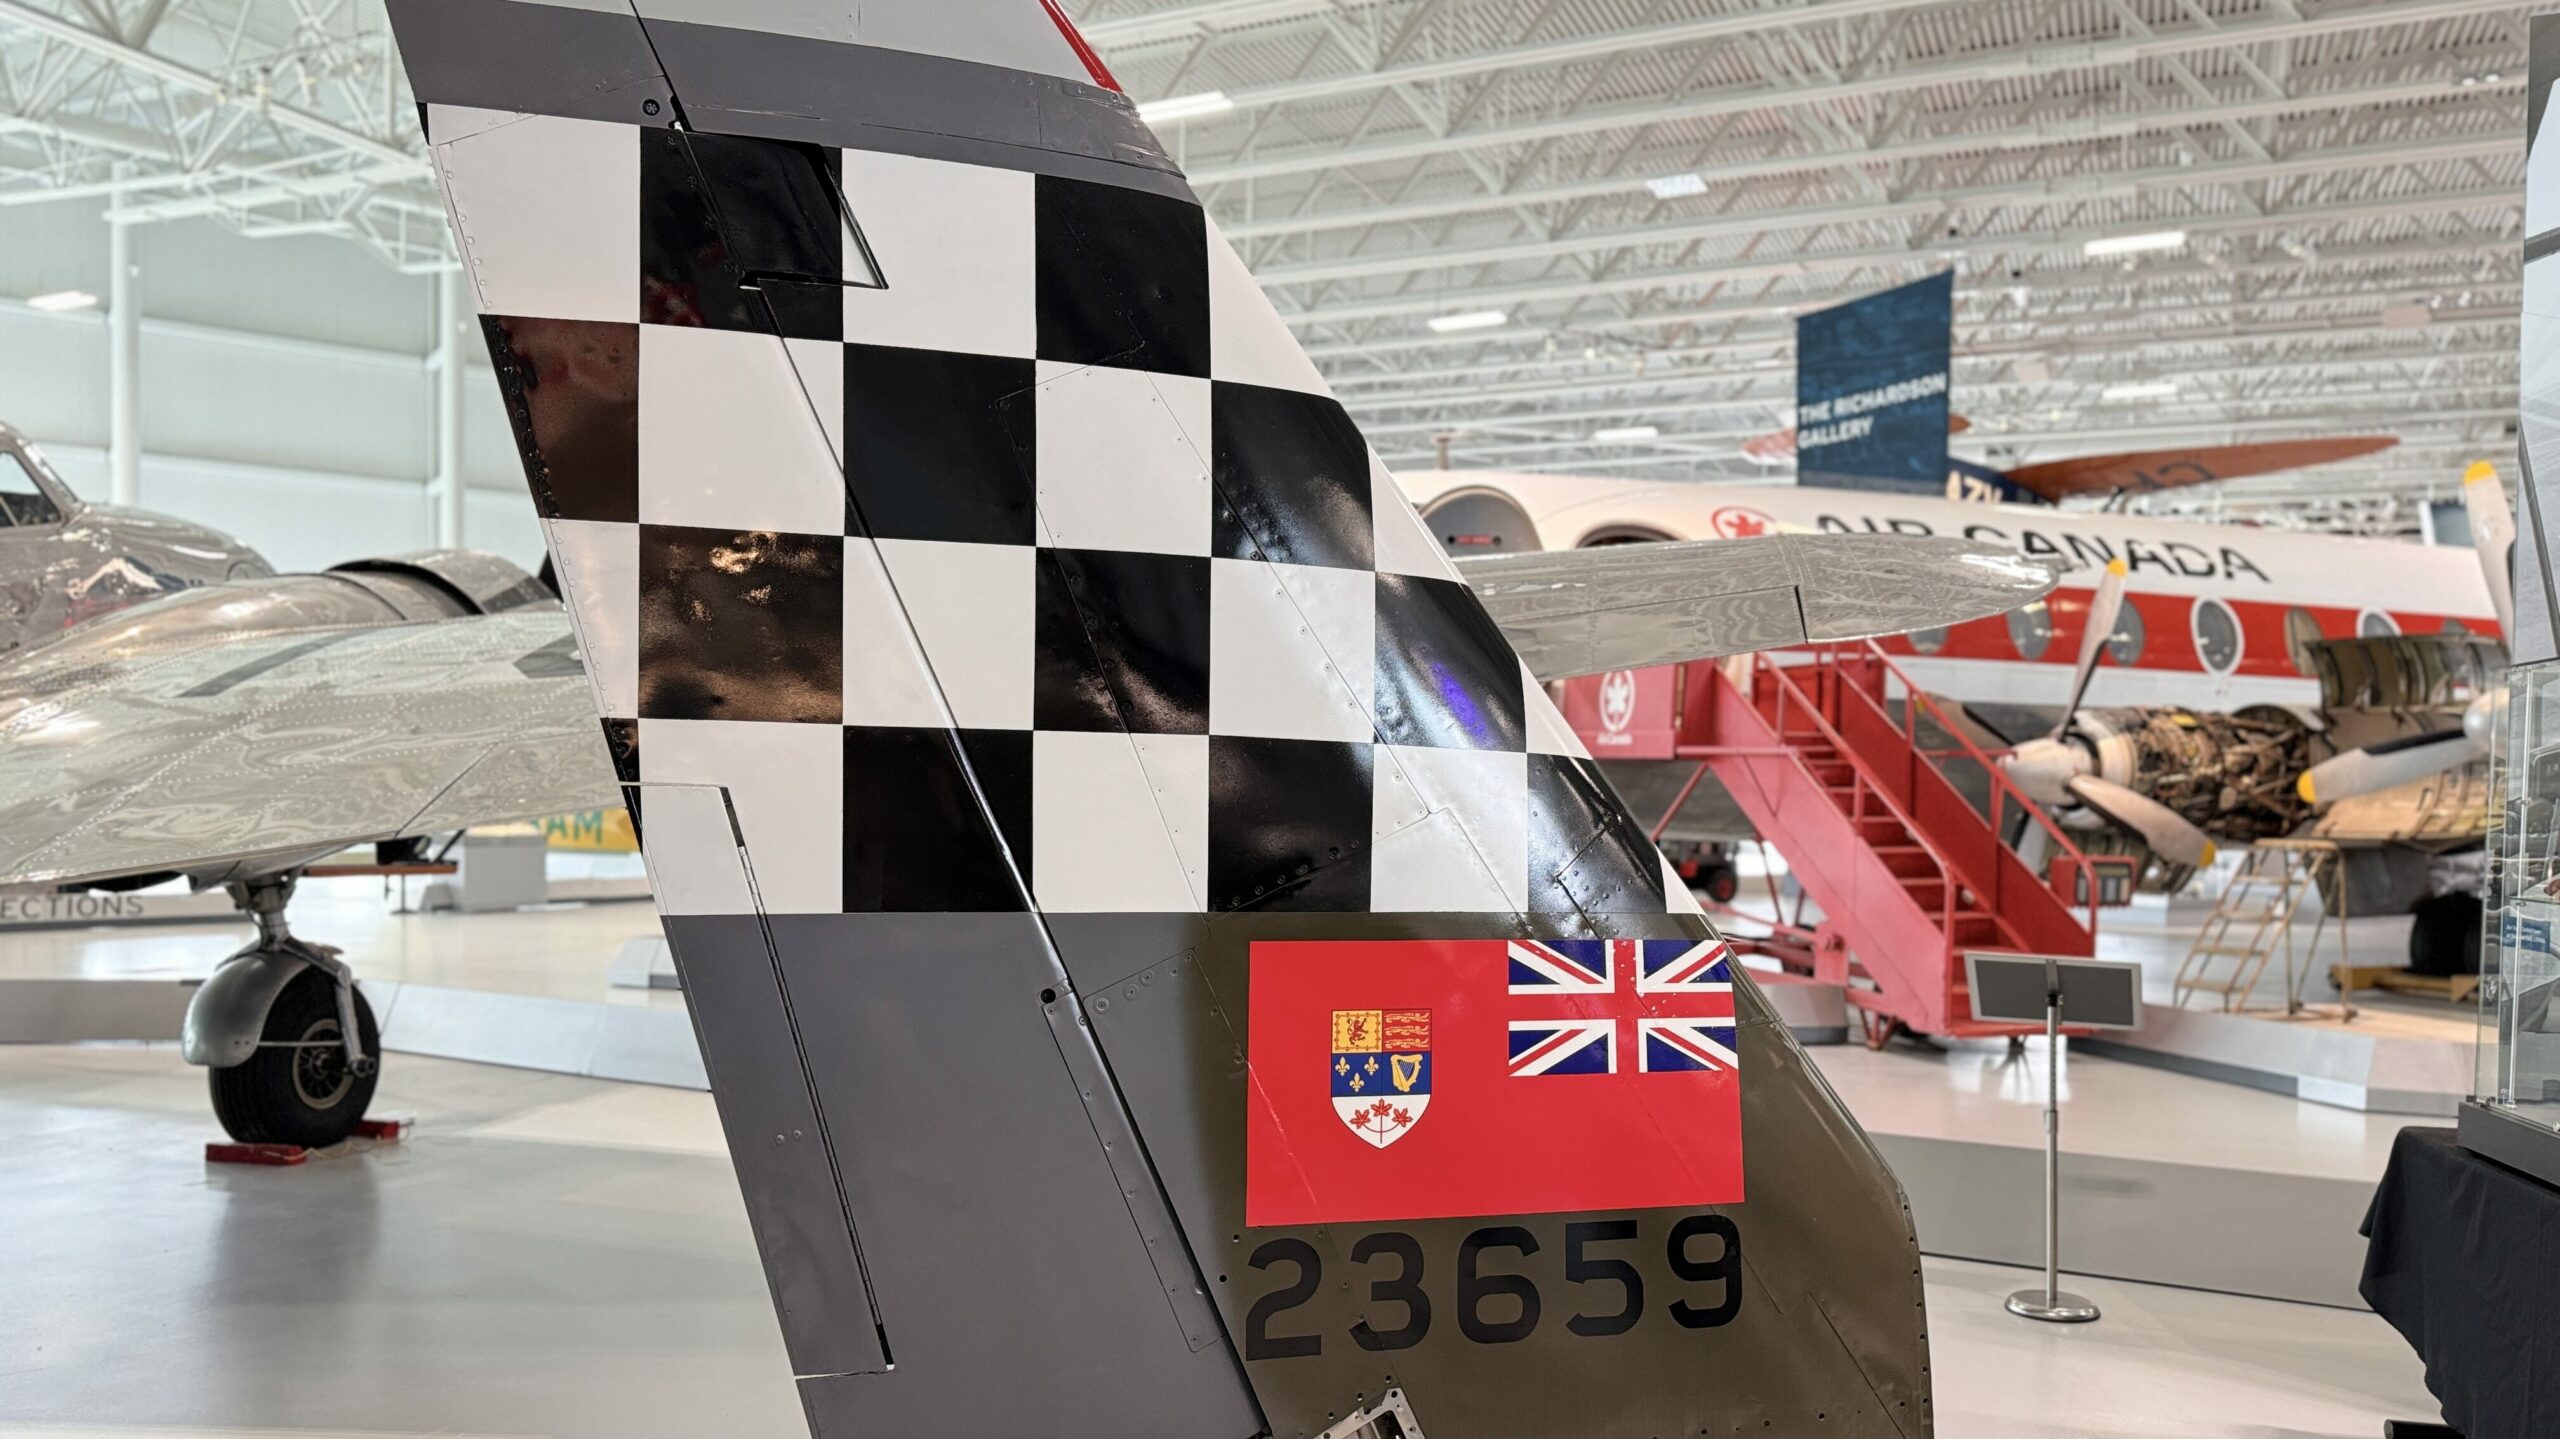 Vertical stabilizer of a vintage F-86 Sabre fighter jet painted with a checkerboard pattern and Manitoba flag on display at the Royal Aviation Museum 